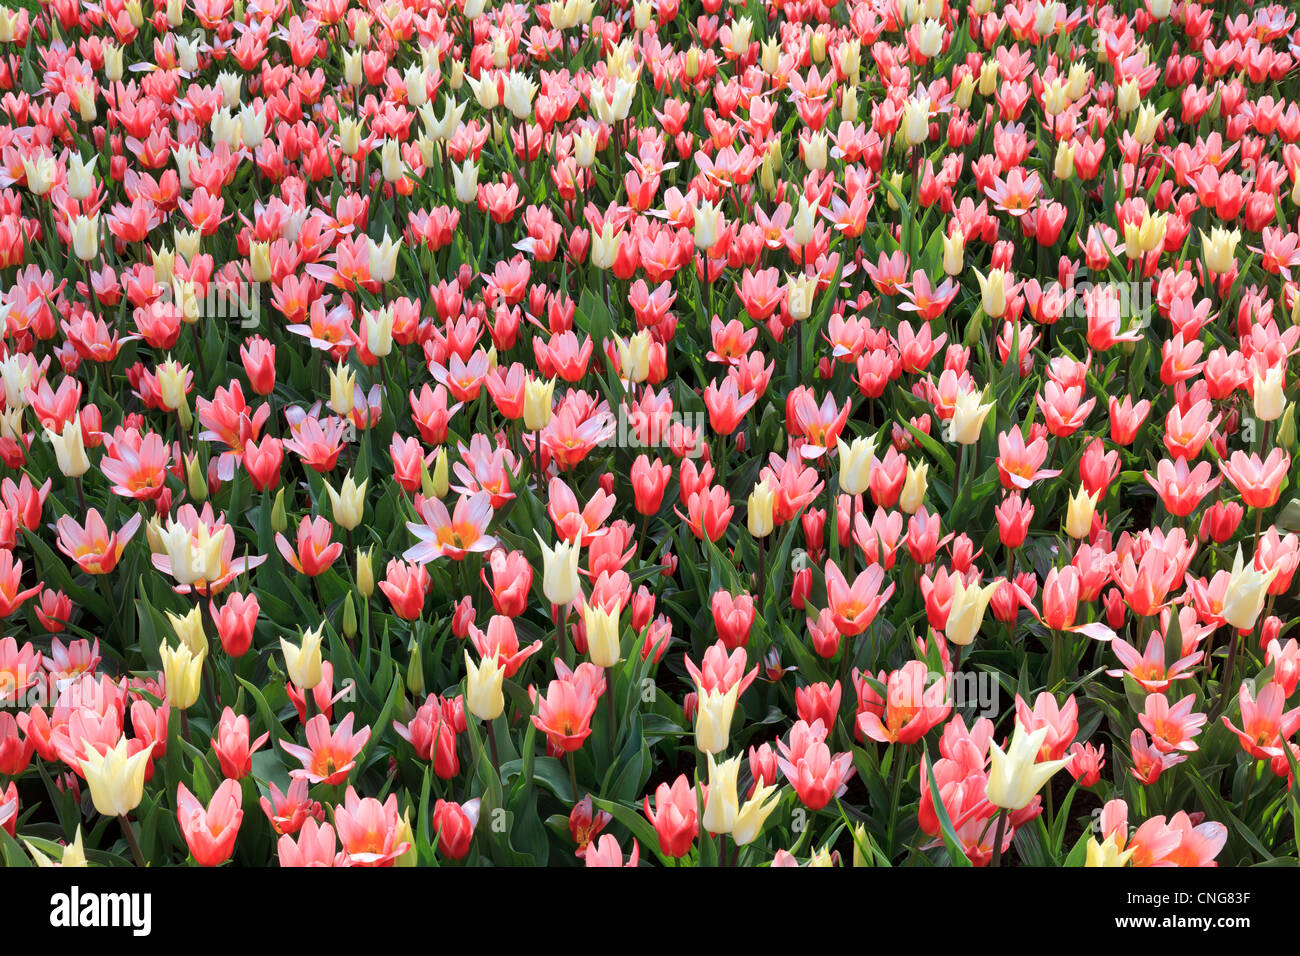 Mix of tulips 'Très Chic' et tulips kaufmanniana 'Heart's Delight'. Stock Photo